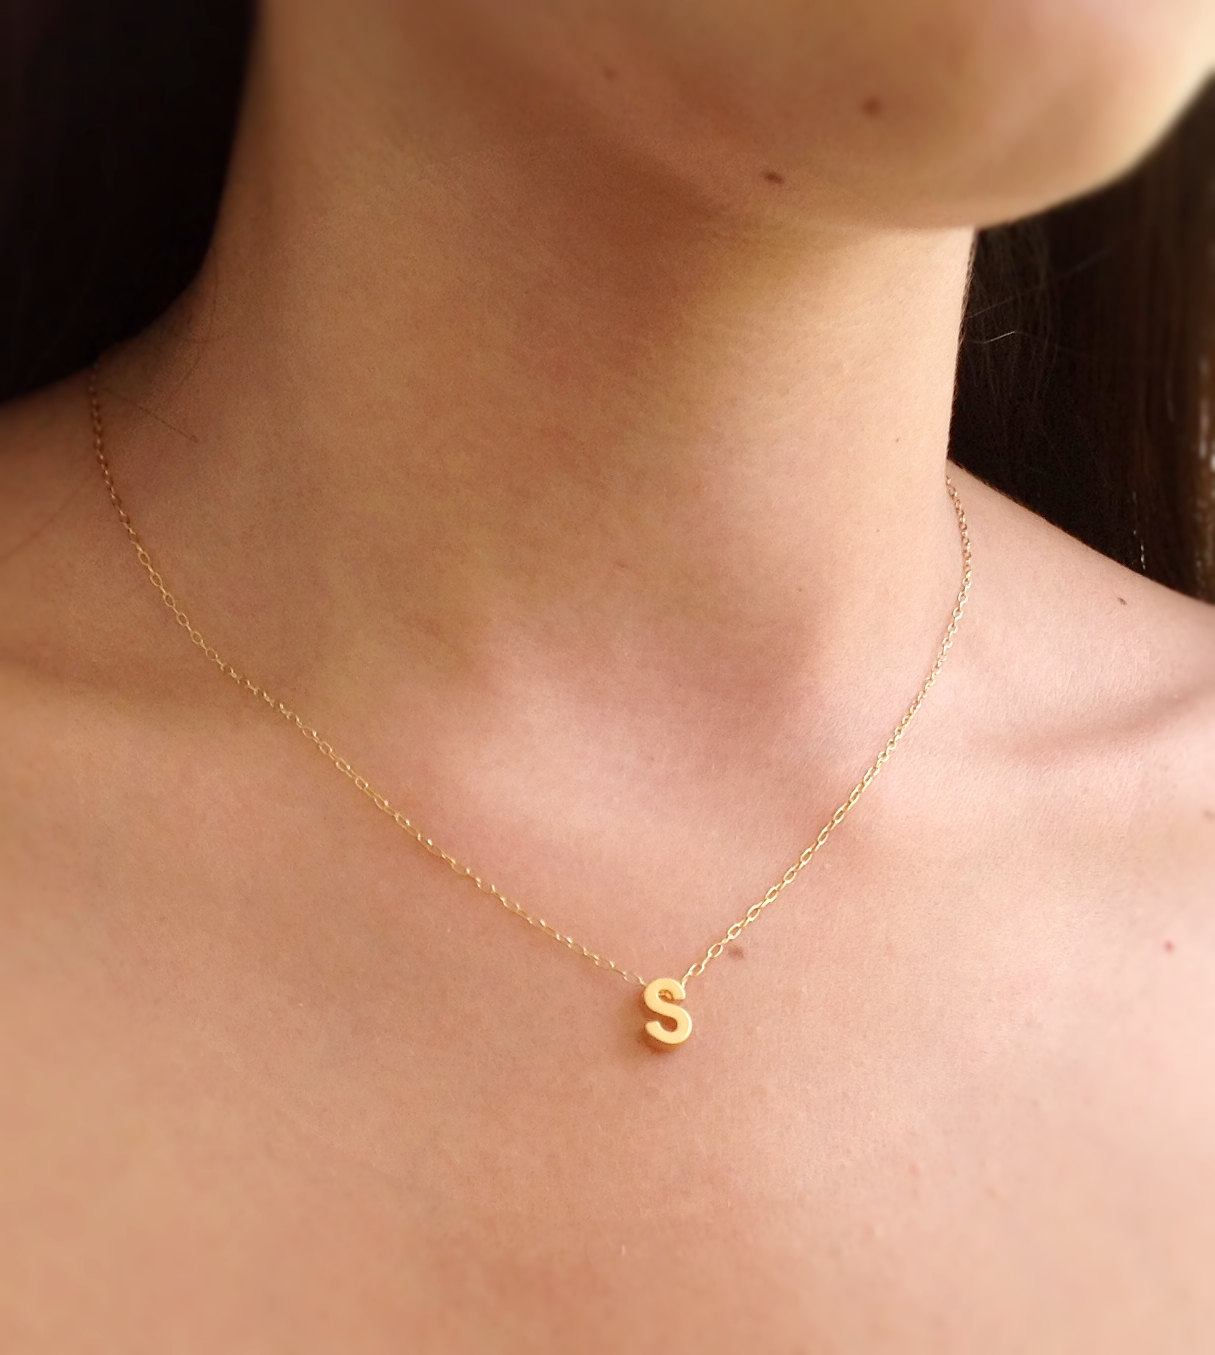 Initial Necklace, Letter Necklace, Gold Necklace, Personalized Necklace, Gold Filled Initial Necklace, Name Necklace, Monogram Necklace 505